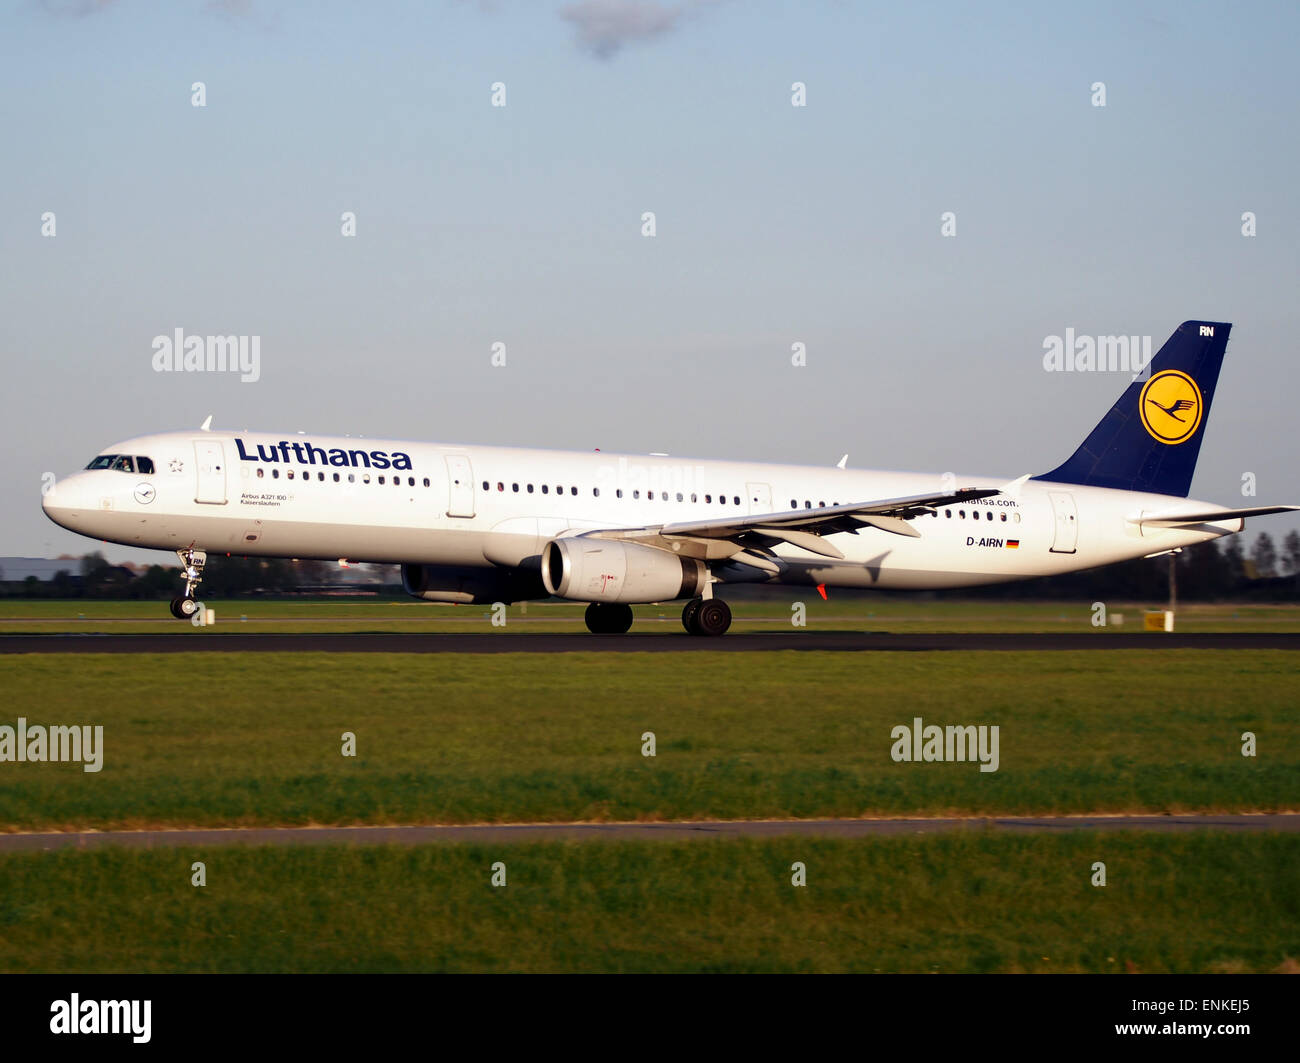 D-AIRN Lufthansa Airbus A321-131 takeoff from Polderbaan, Schiphol (AMS - EHAM) at sunset, Stock Photo